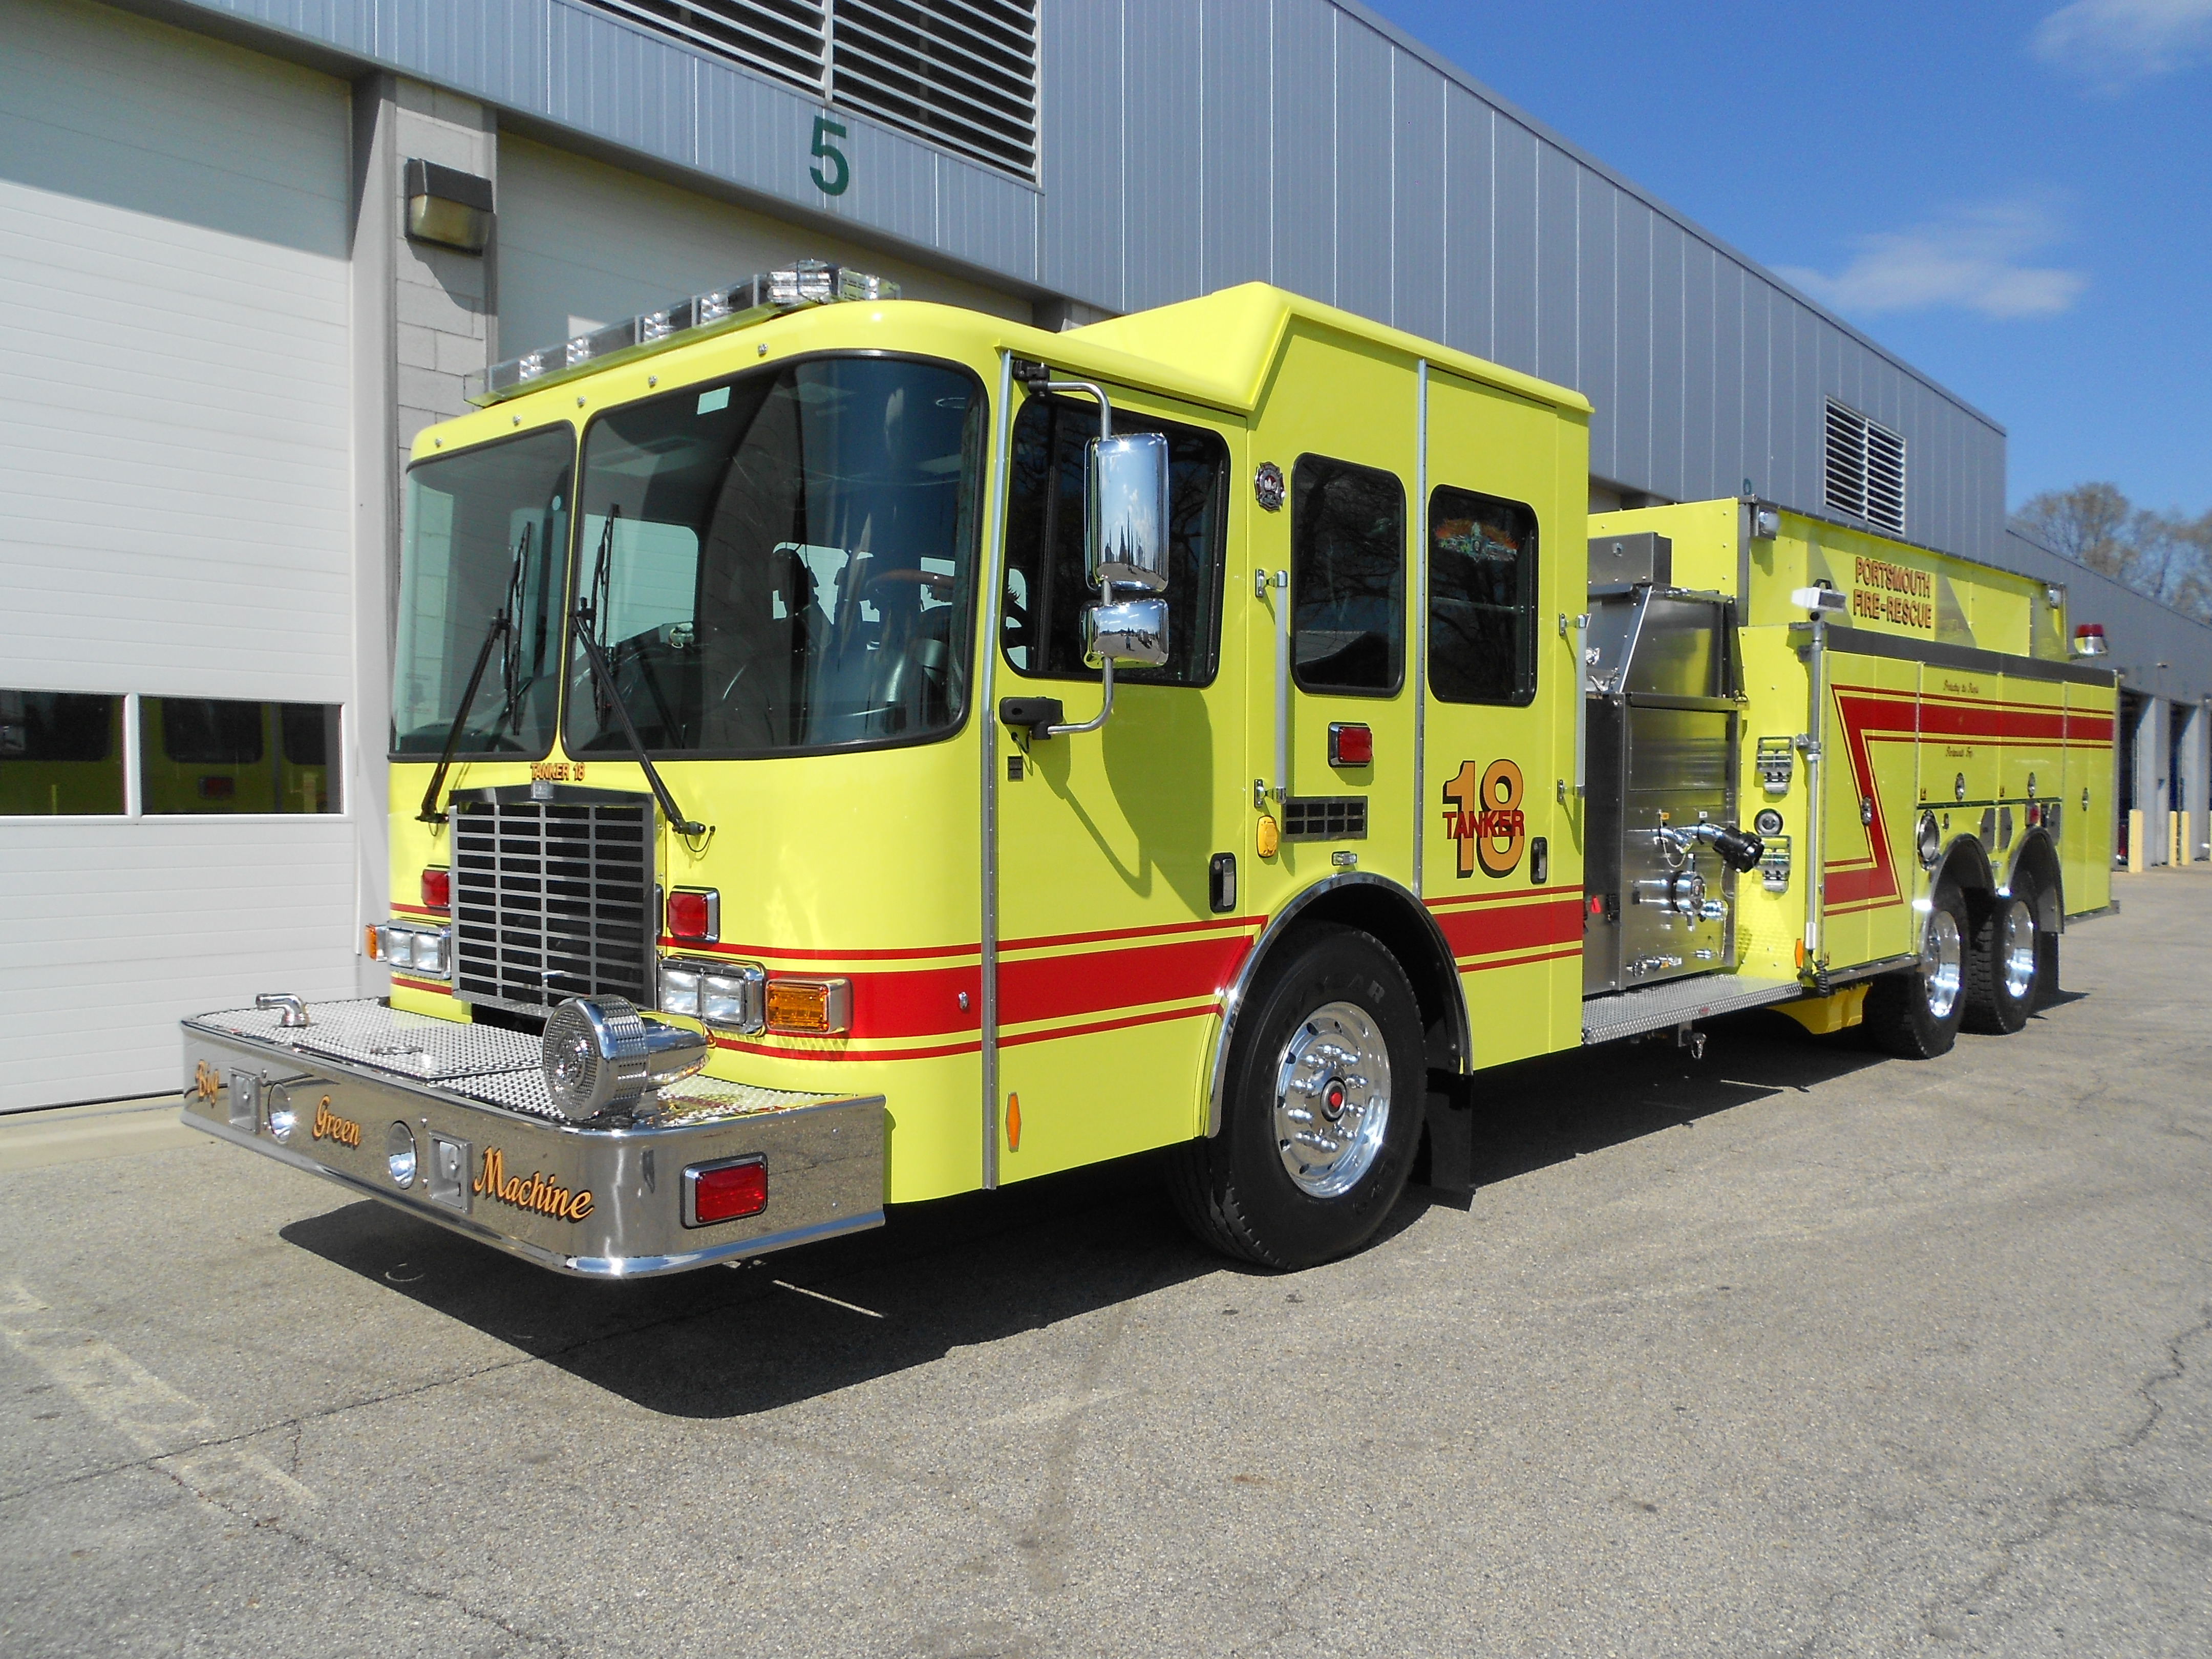 Portsmouth Township Fire Department, MI – #22735